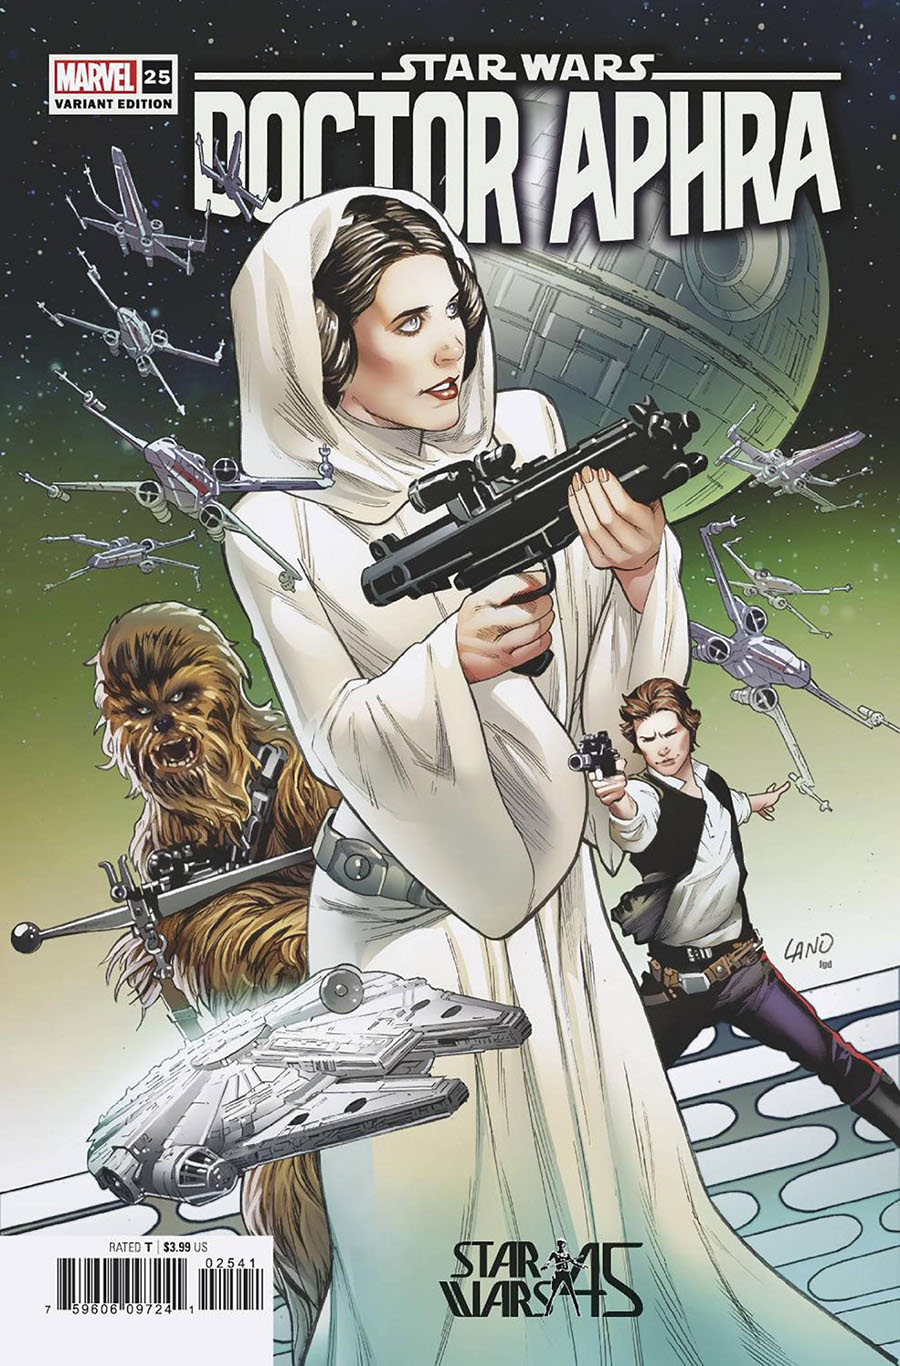 Star Wars Doctor Aphra Vol 2 #25 Cover B Variant Greg Land A New Hope 45th Anniversary Cover